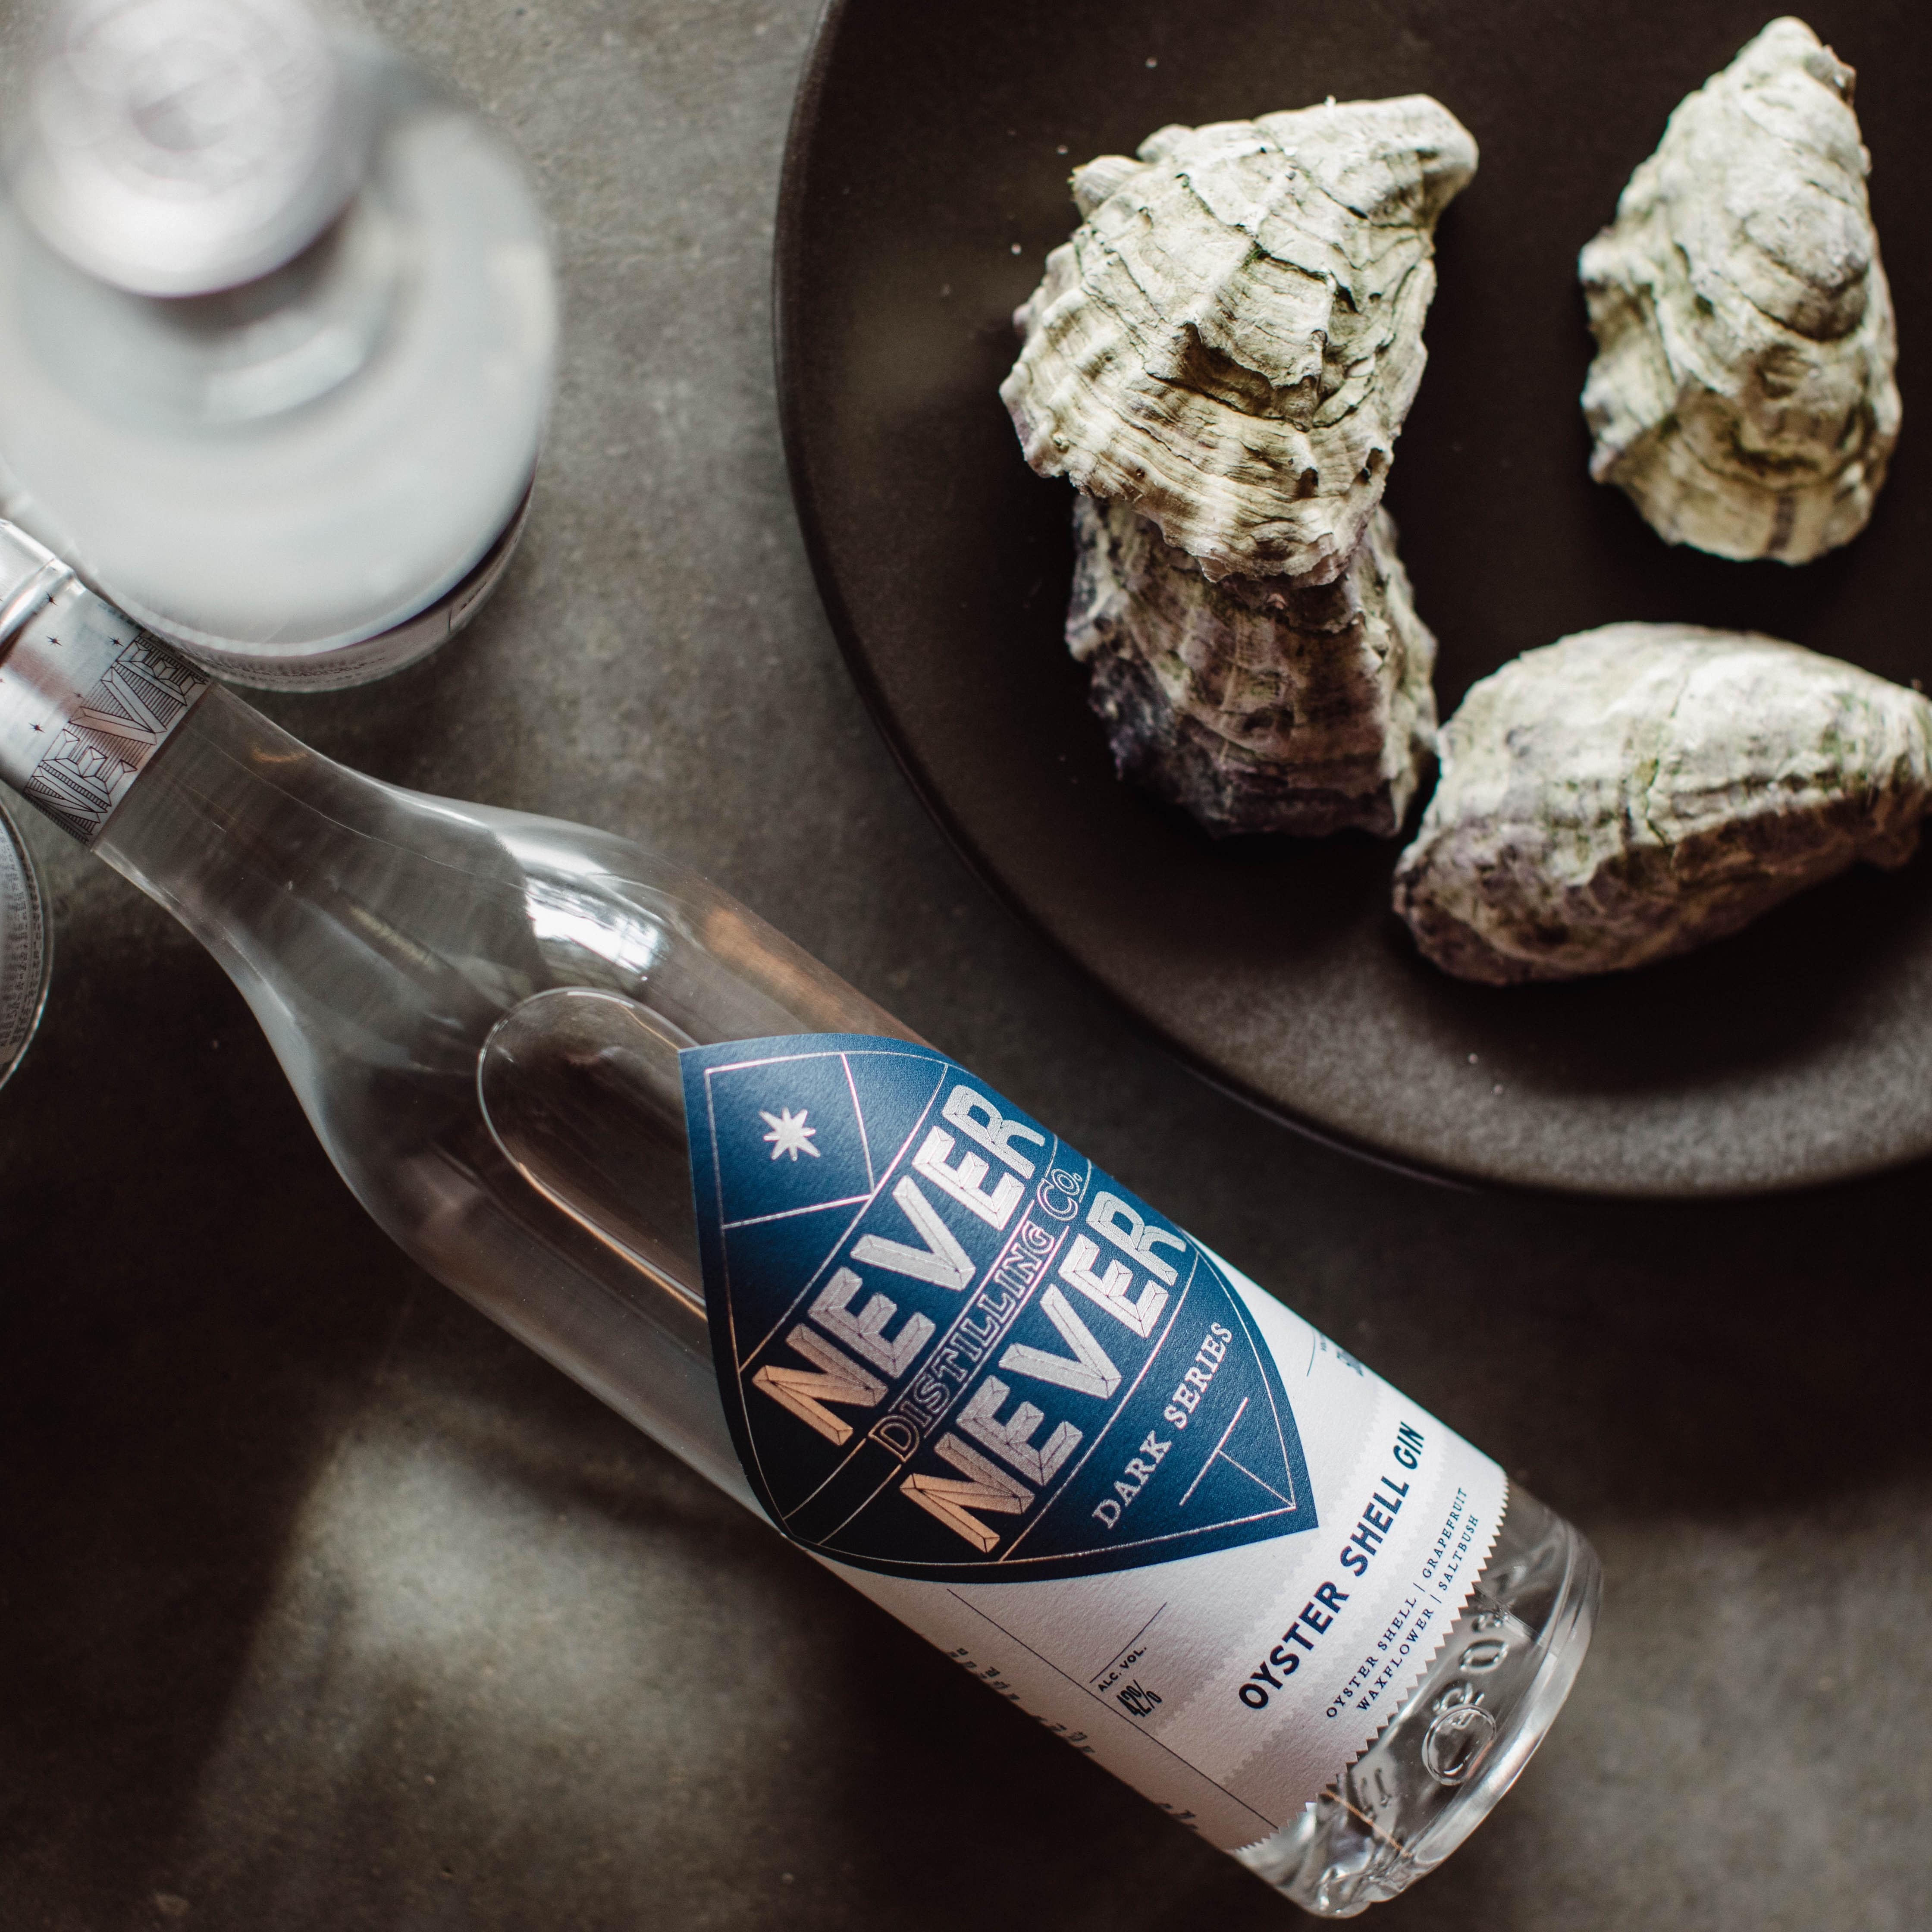 Announcing our oyster shell gin